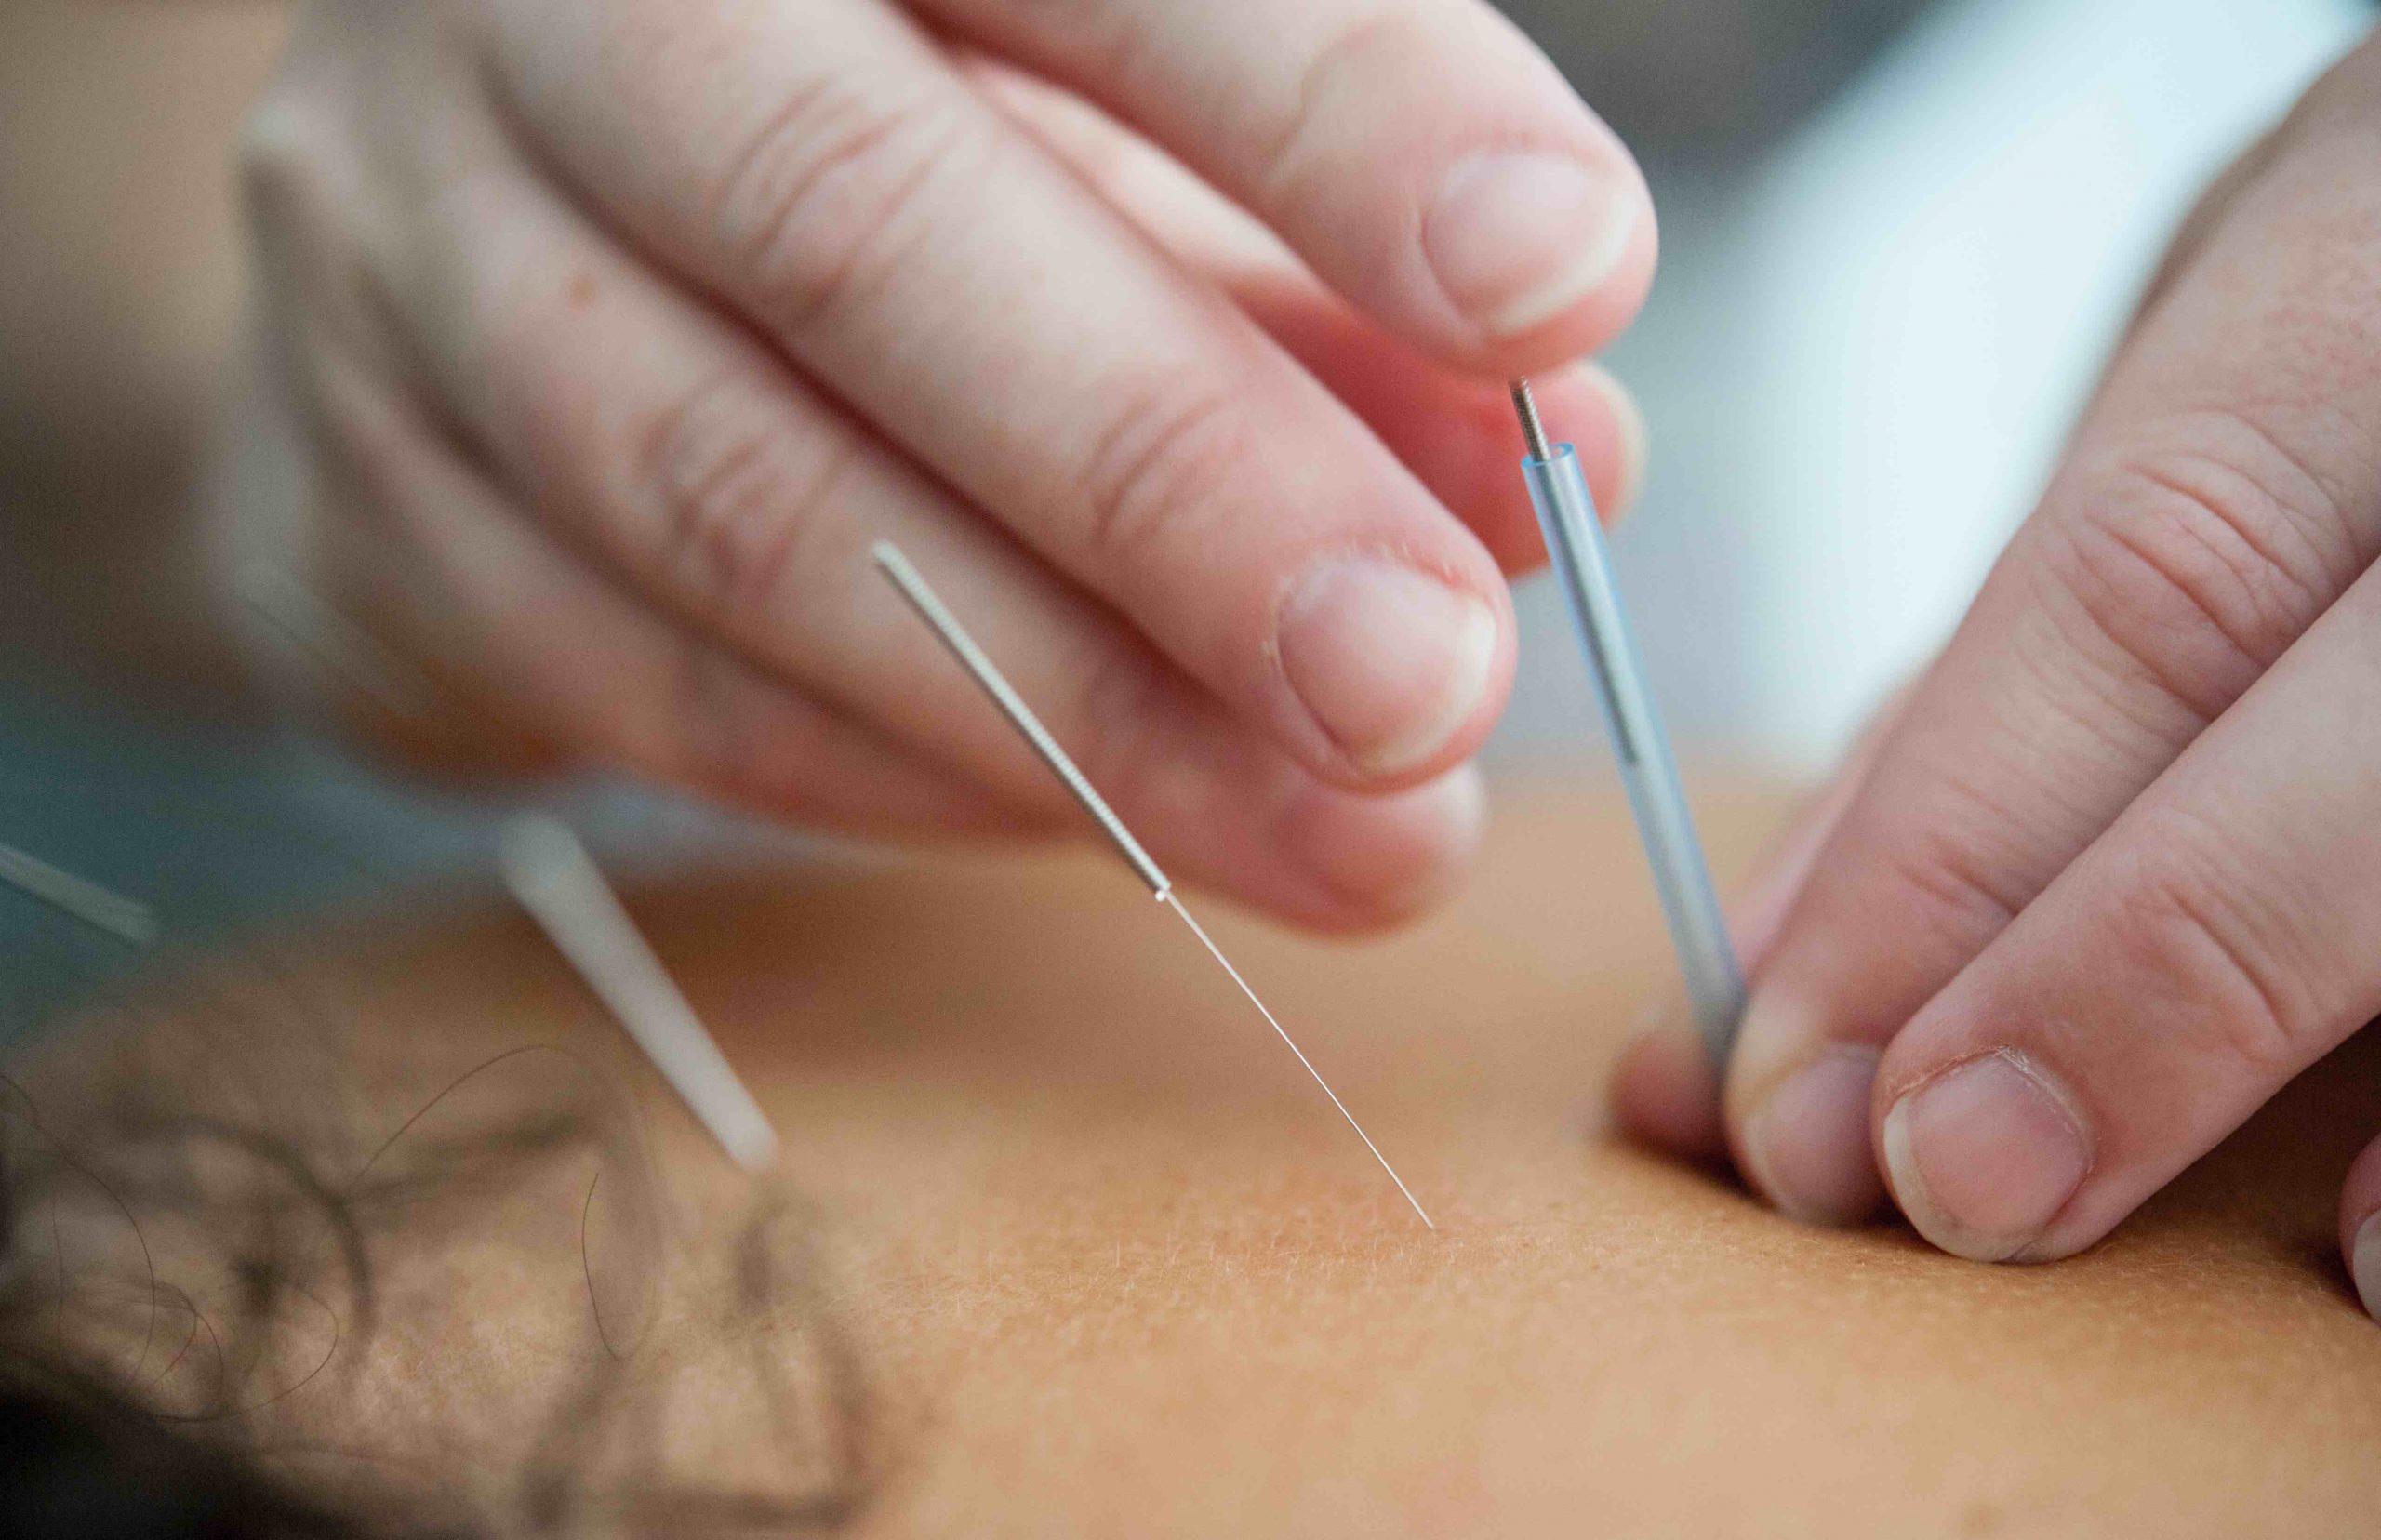 ACUPUNCTURE FOR HAIR LOSS: Does it work?